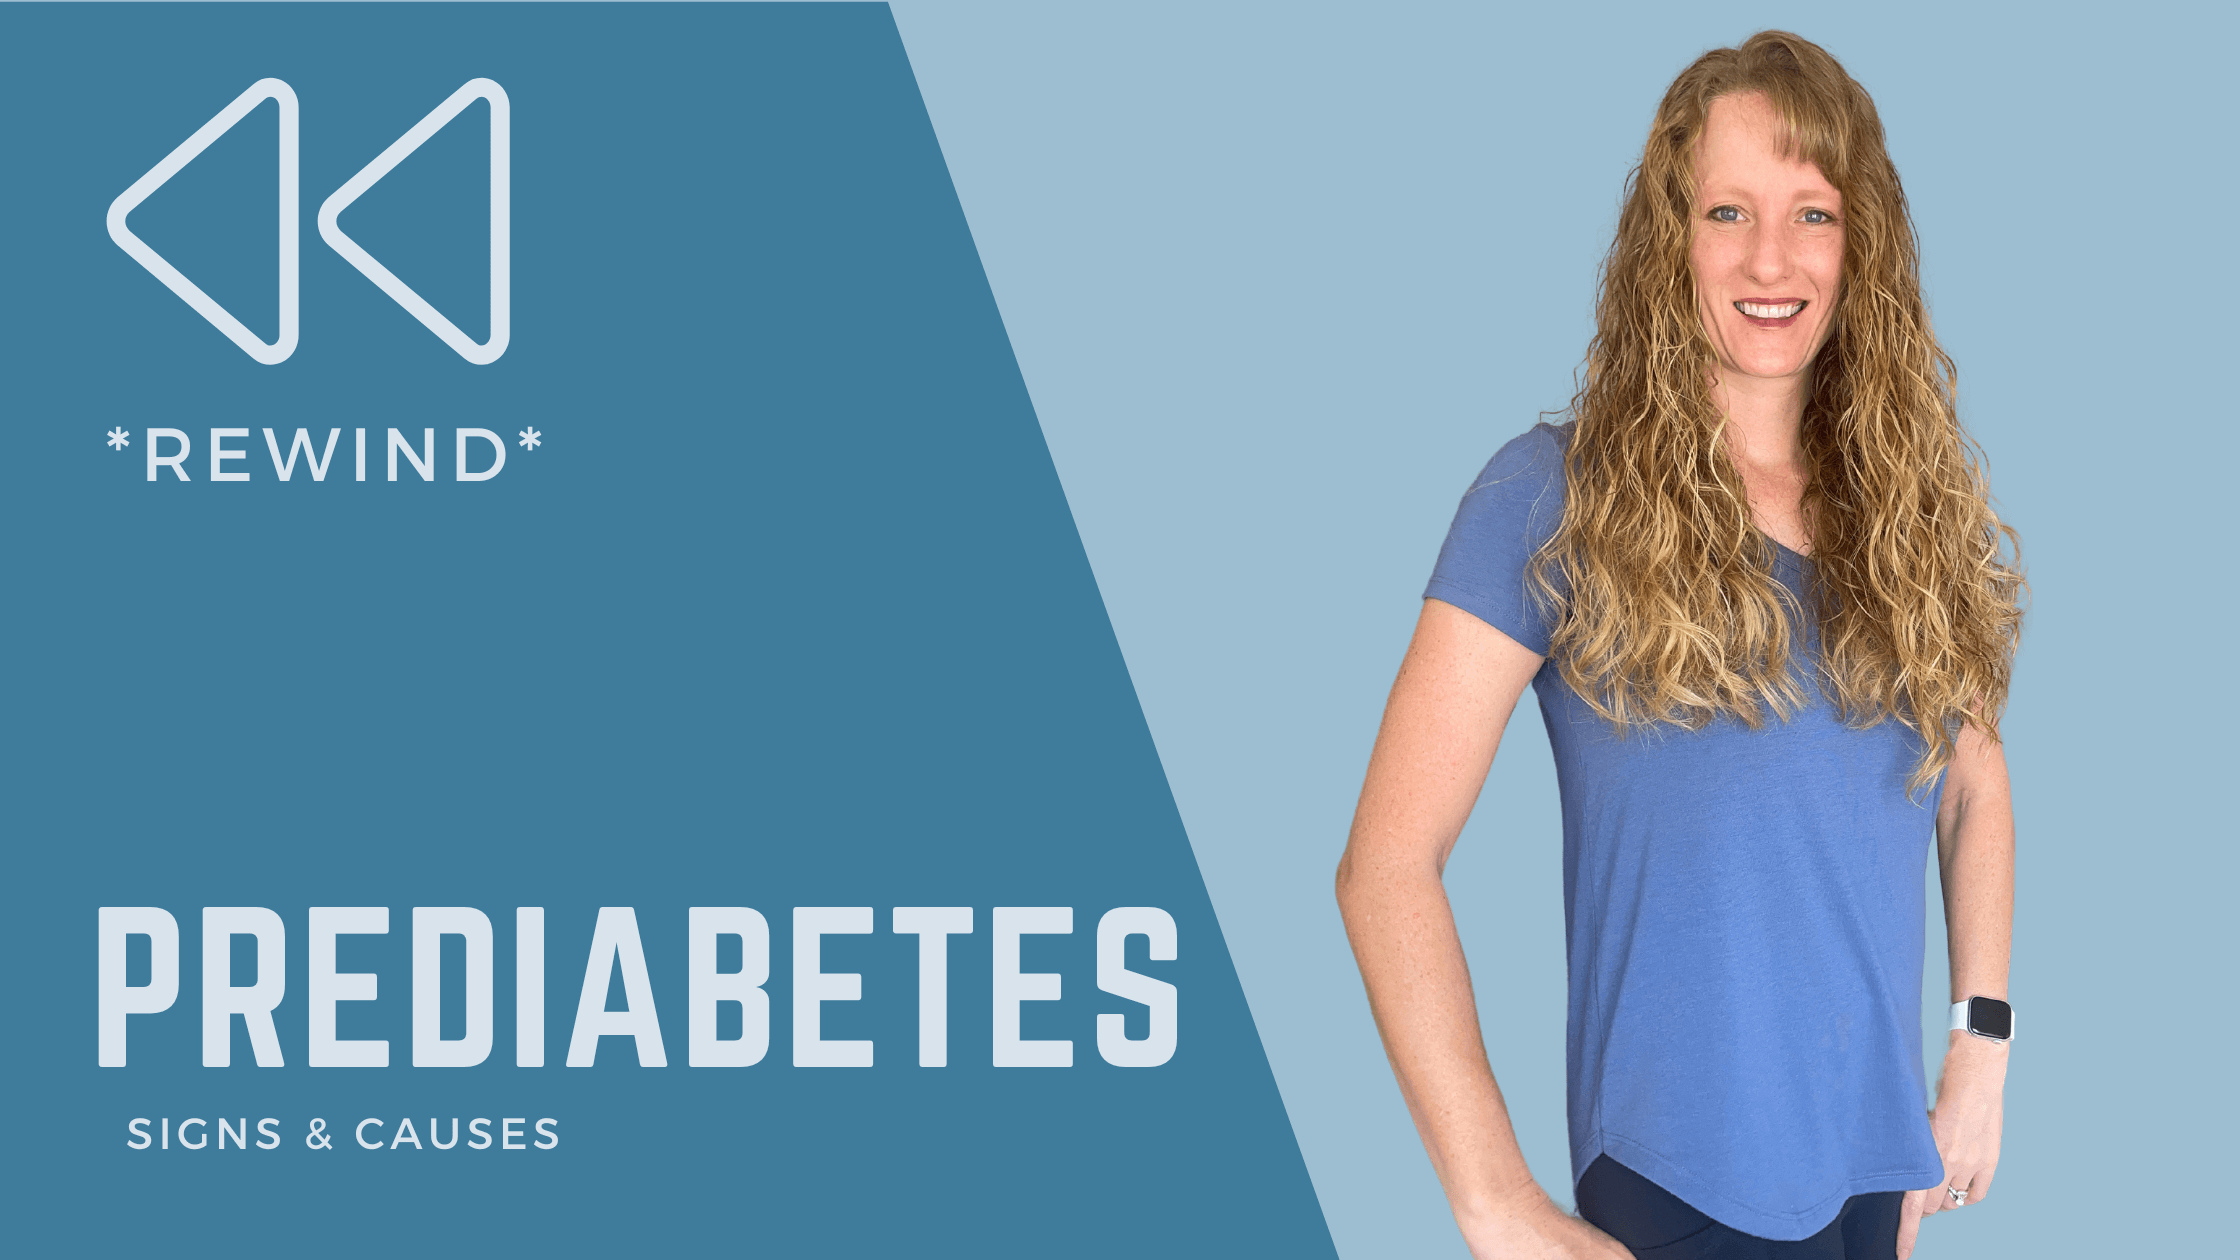 Holistic Health Bites podcast by Functional Nutritionist Andrea Nicholson, MS, BCHN discussing prediabetes signs and causes